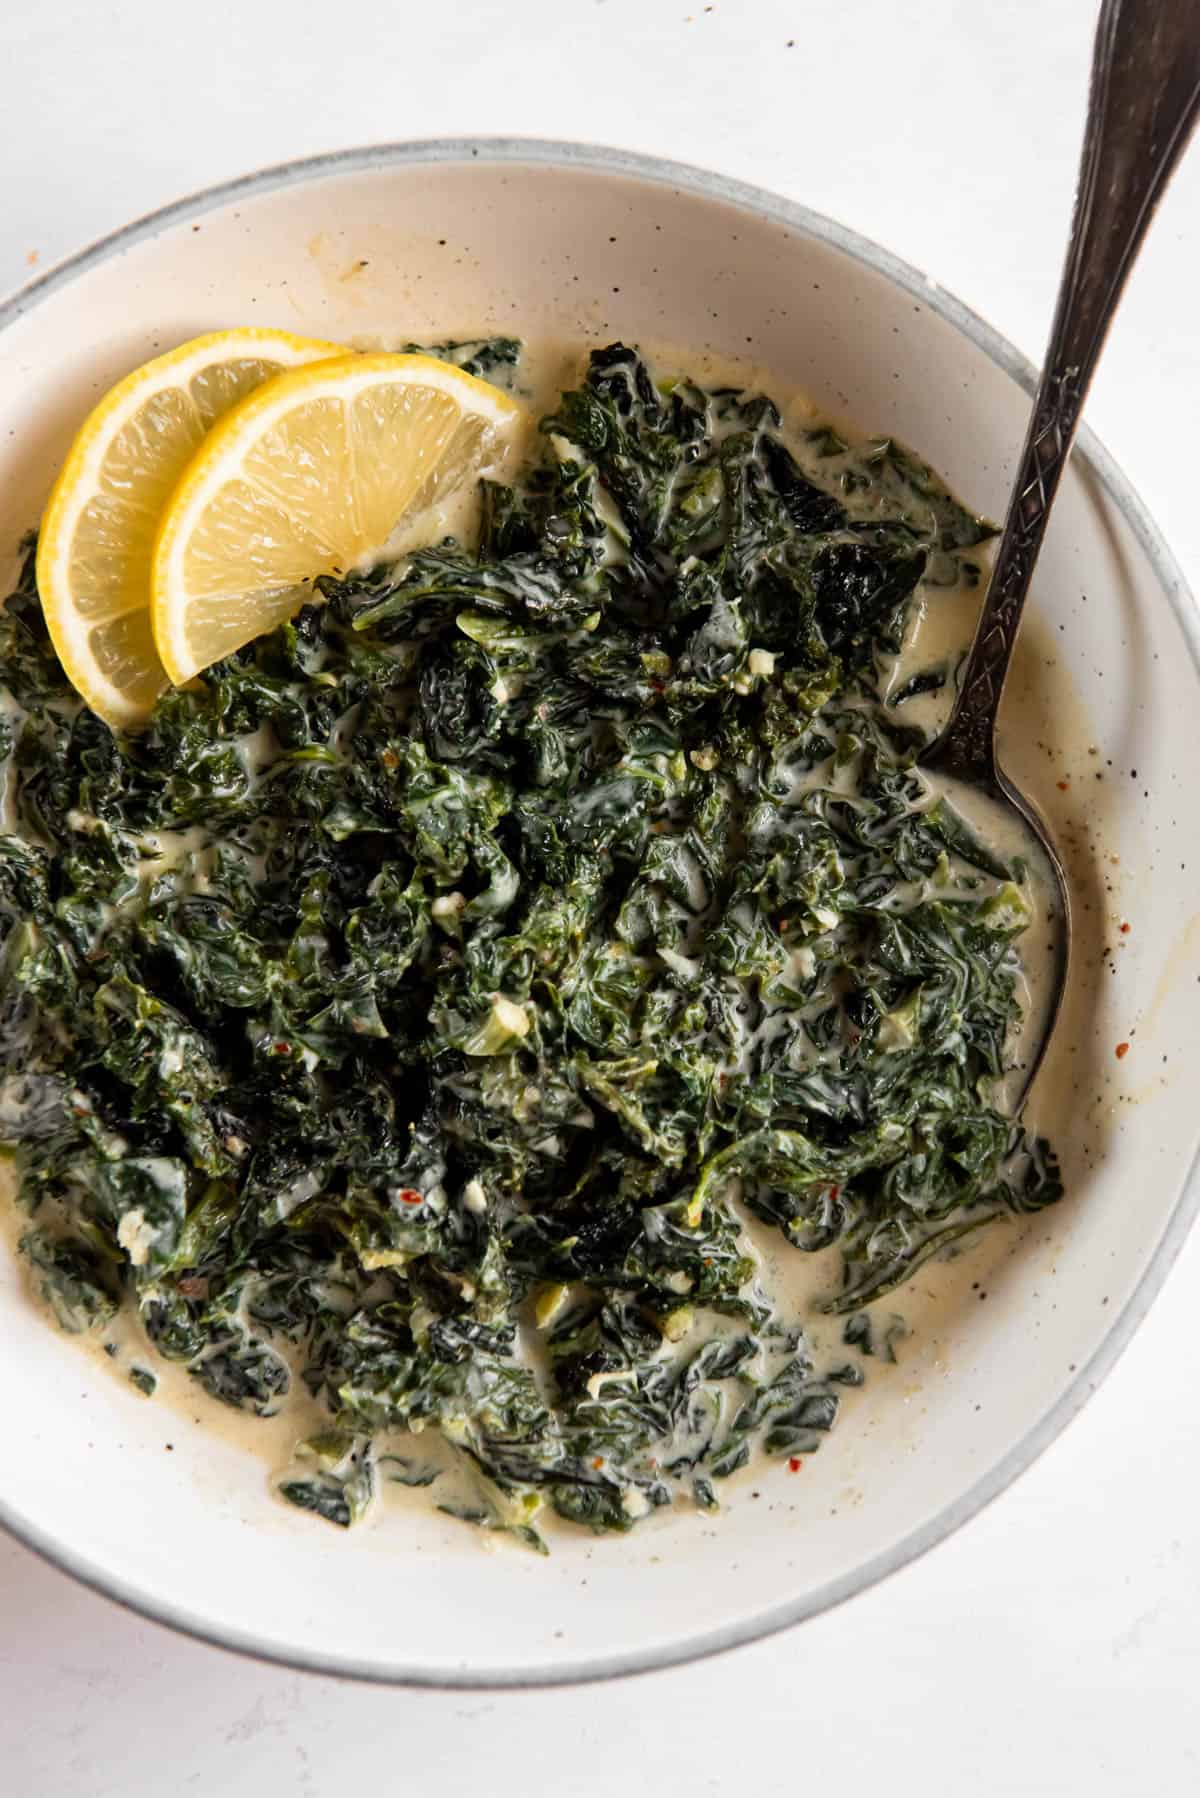 creamed kale in a bowl with two slices of lemon on the side as a garnish